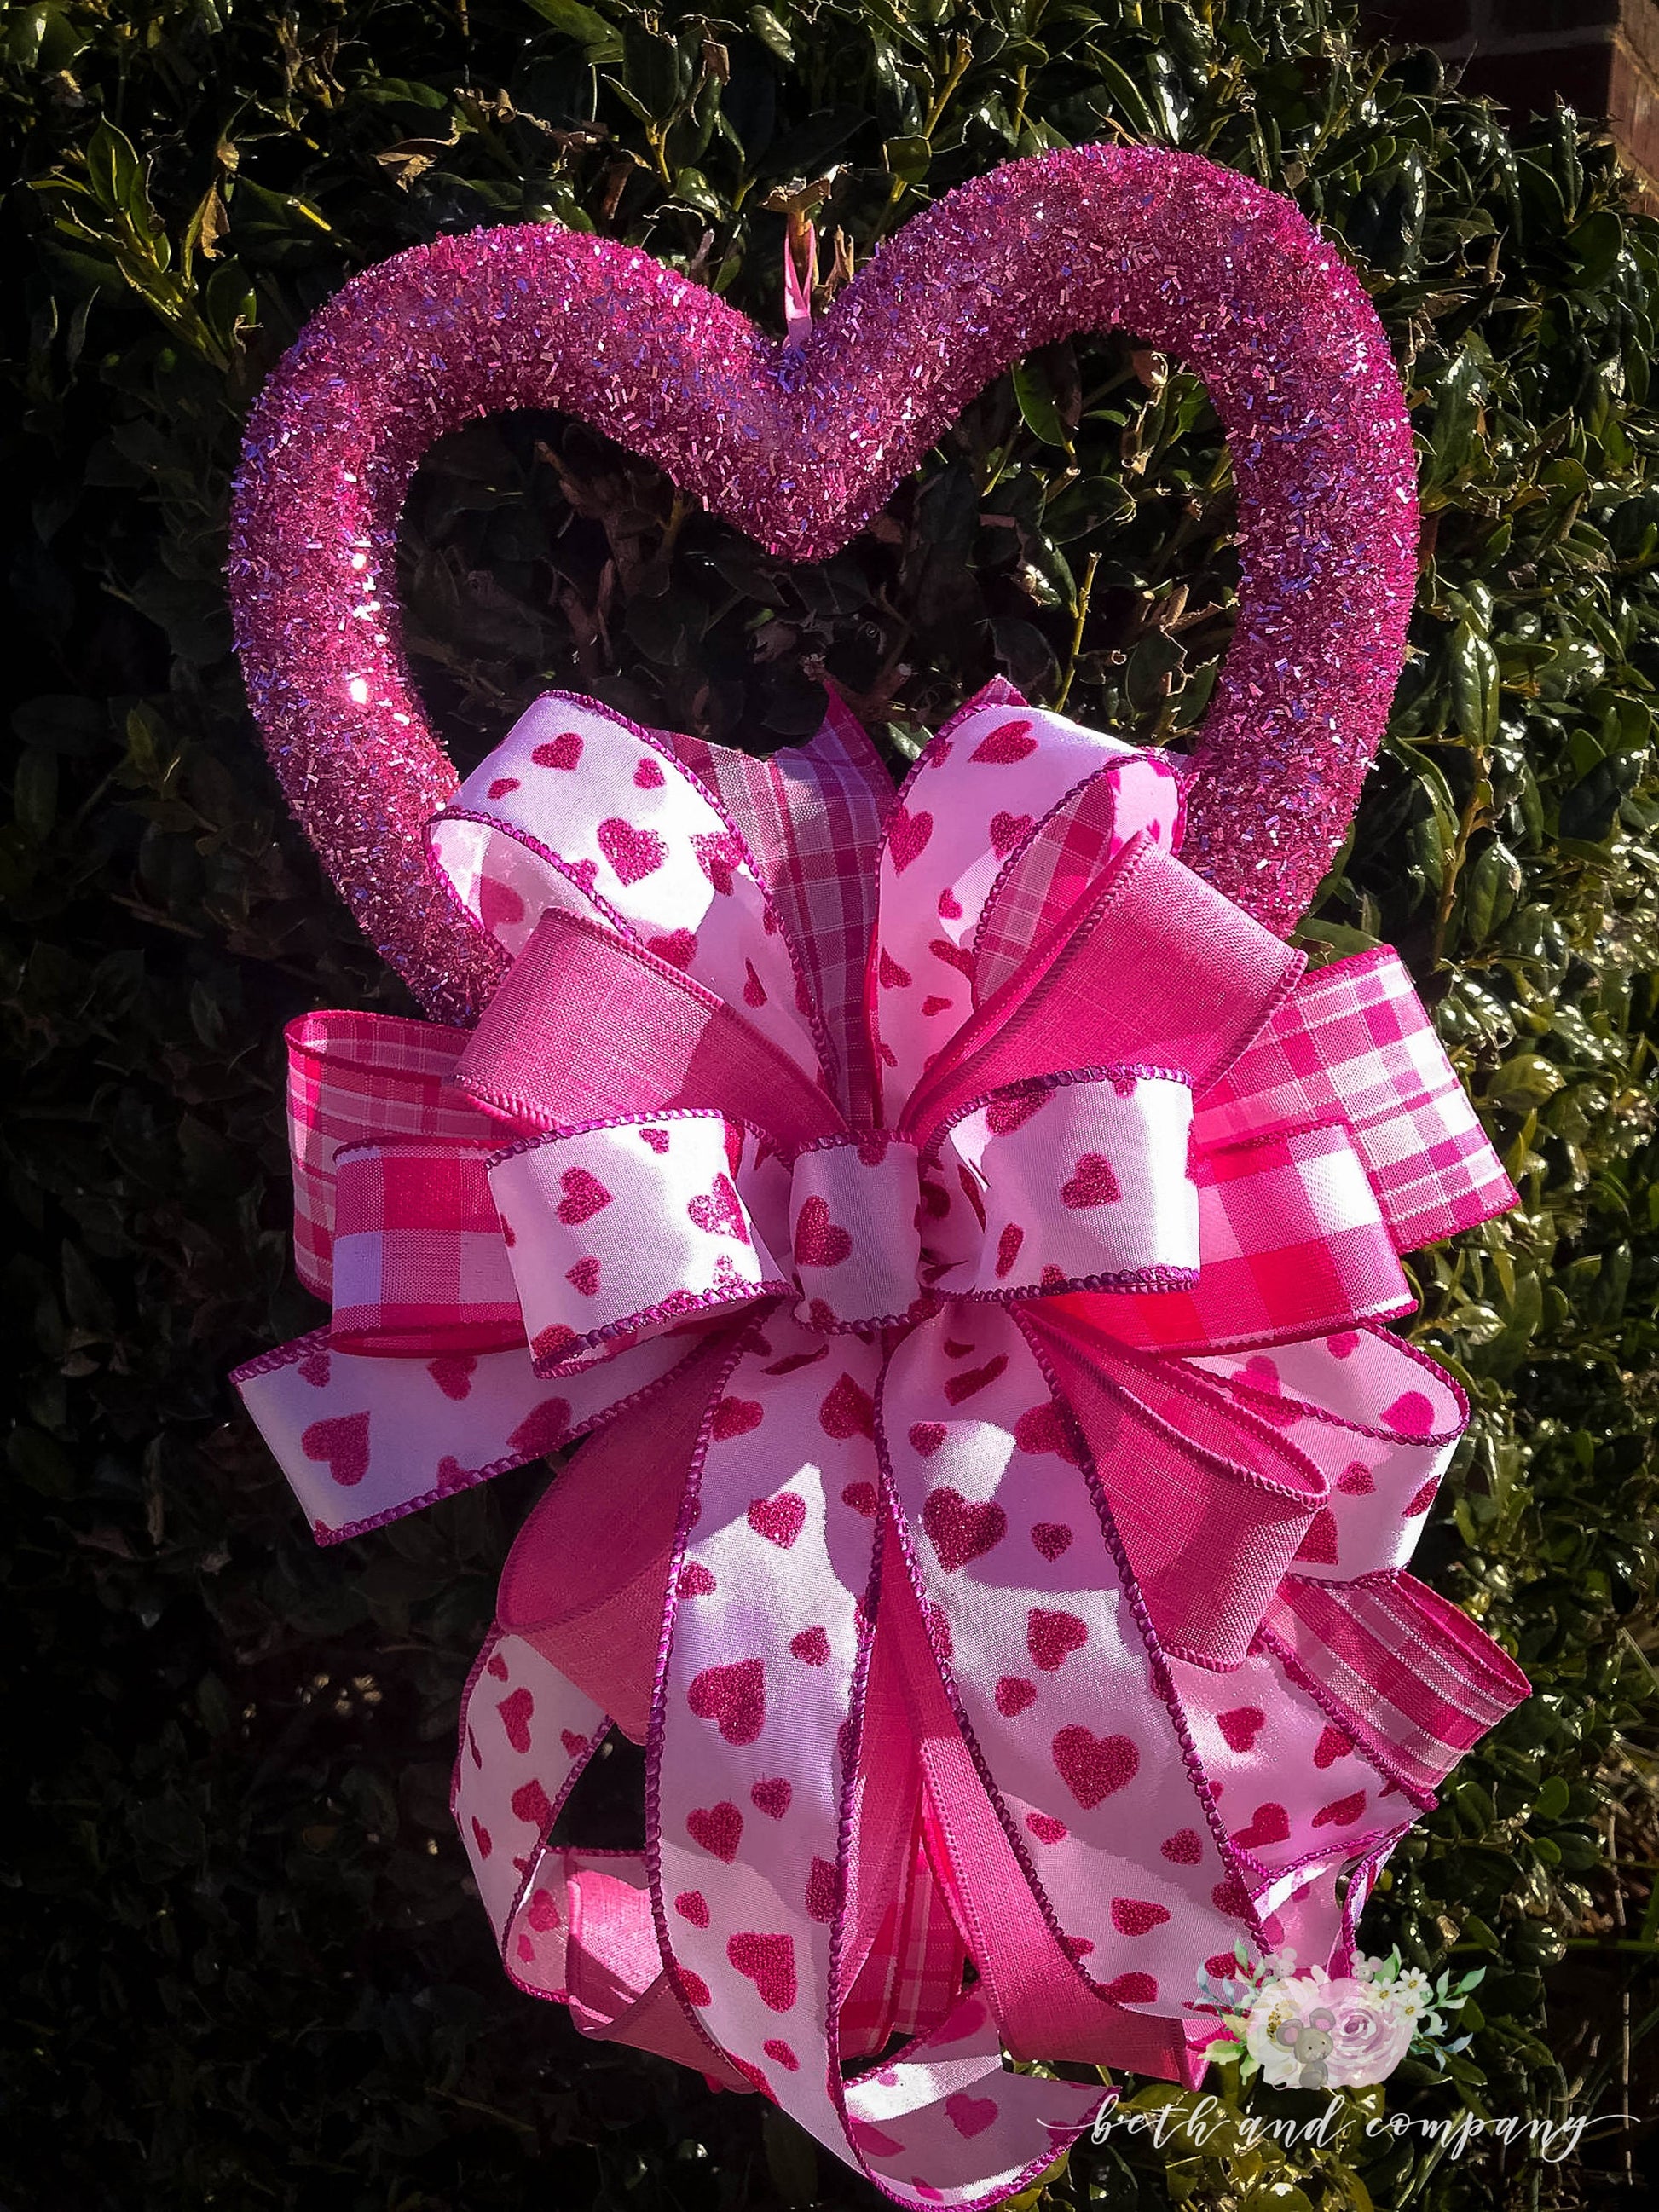 Red Valentines Love is Everything Heart Wreath for Your Front Door. 